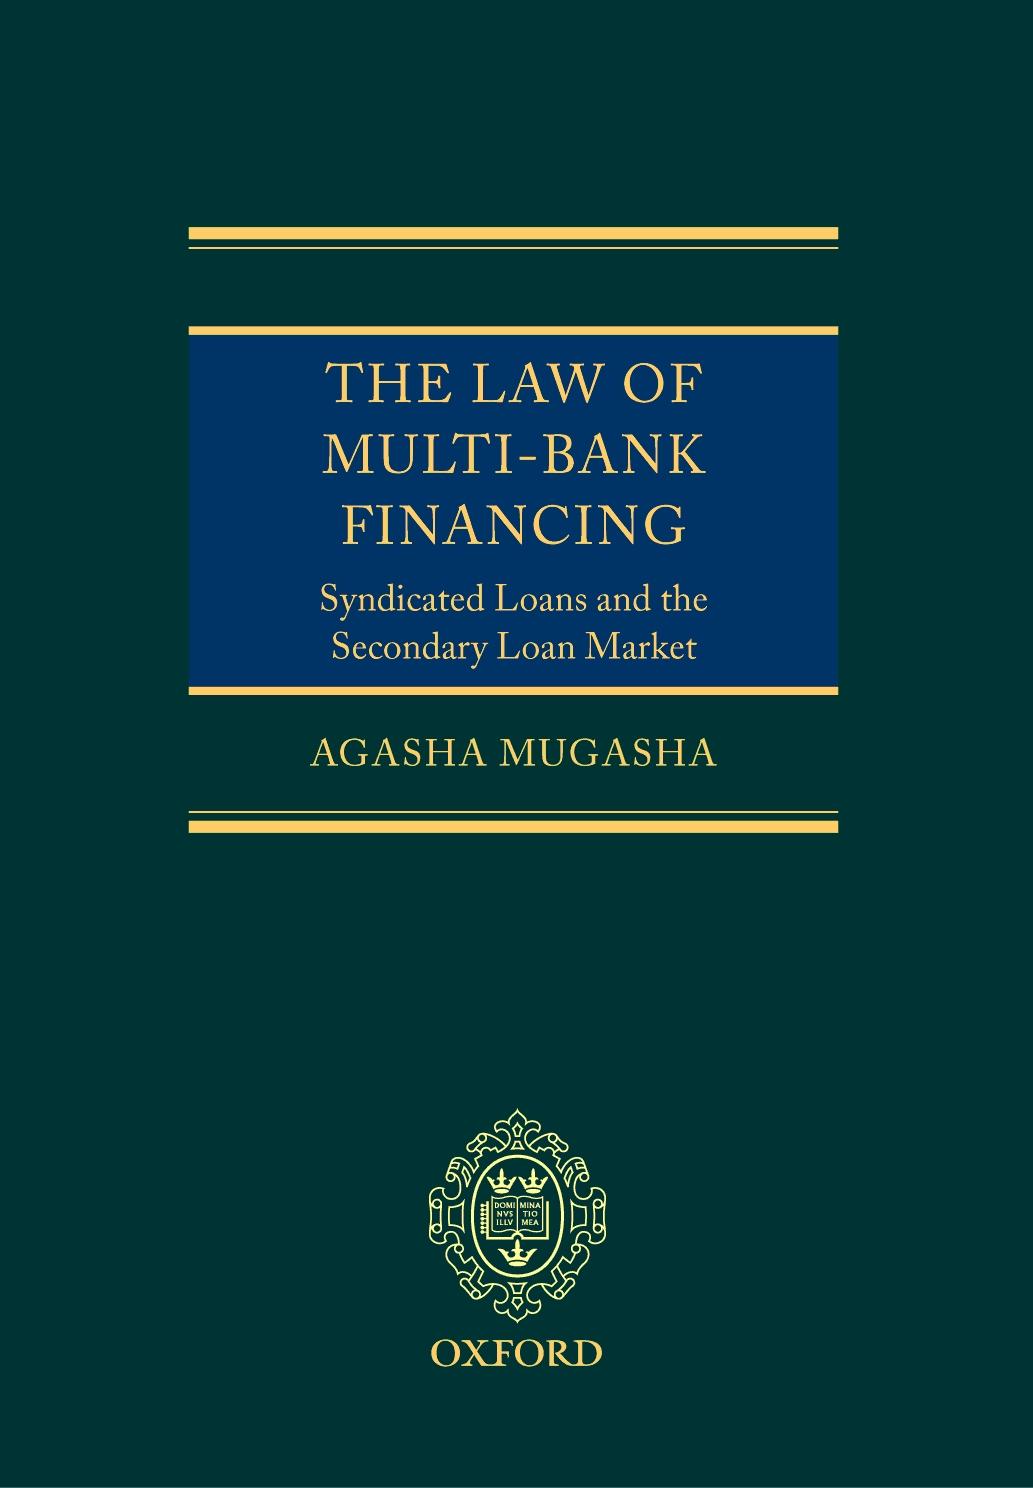 The Law Of Multi-Bank Financing